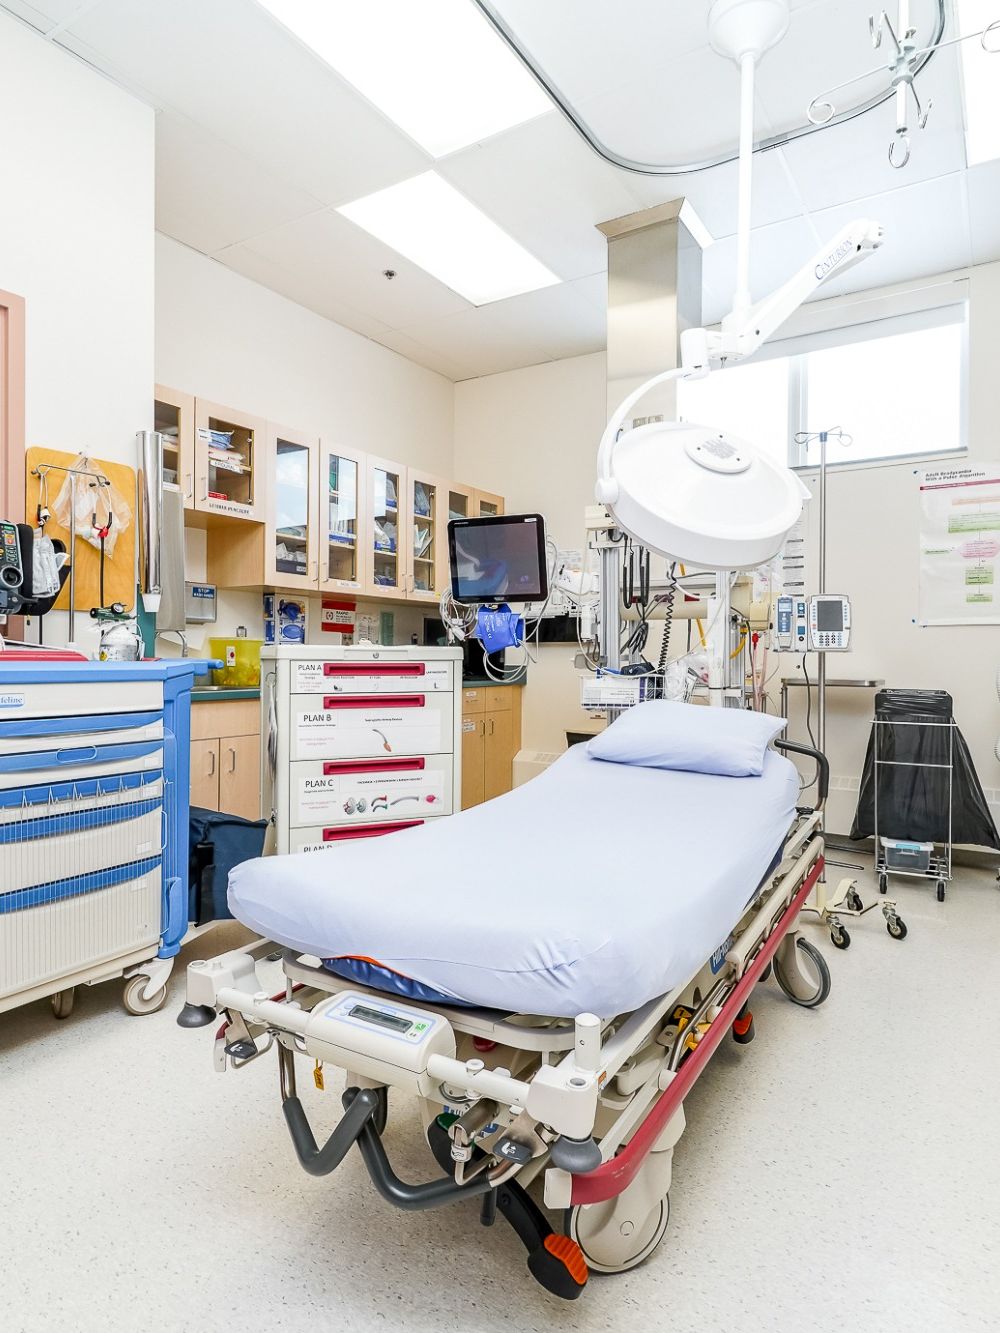 Two fully-equipped trauma rooms support life-saving measures for anyone in crisis.